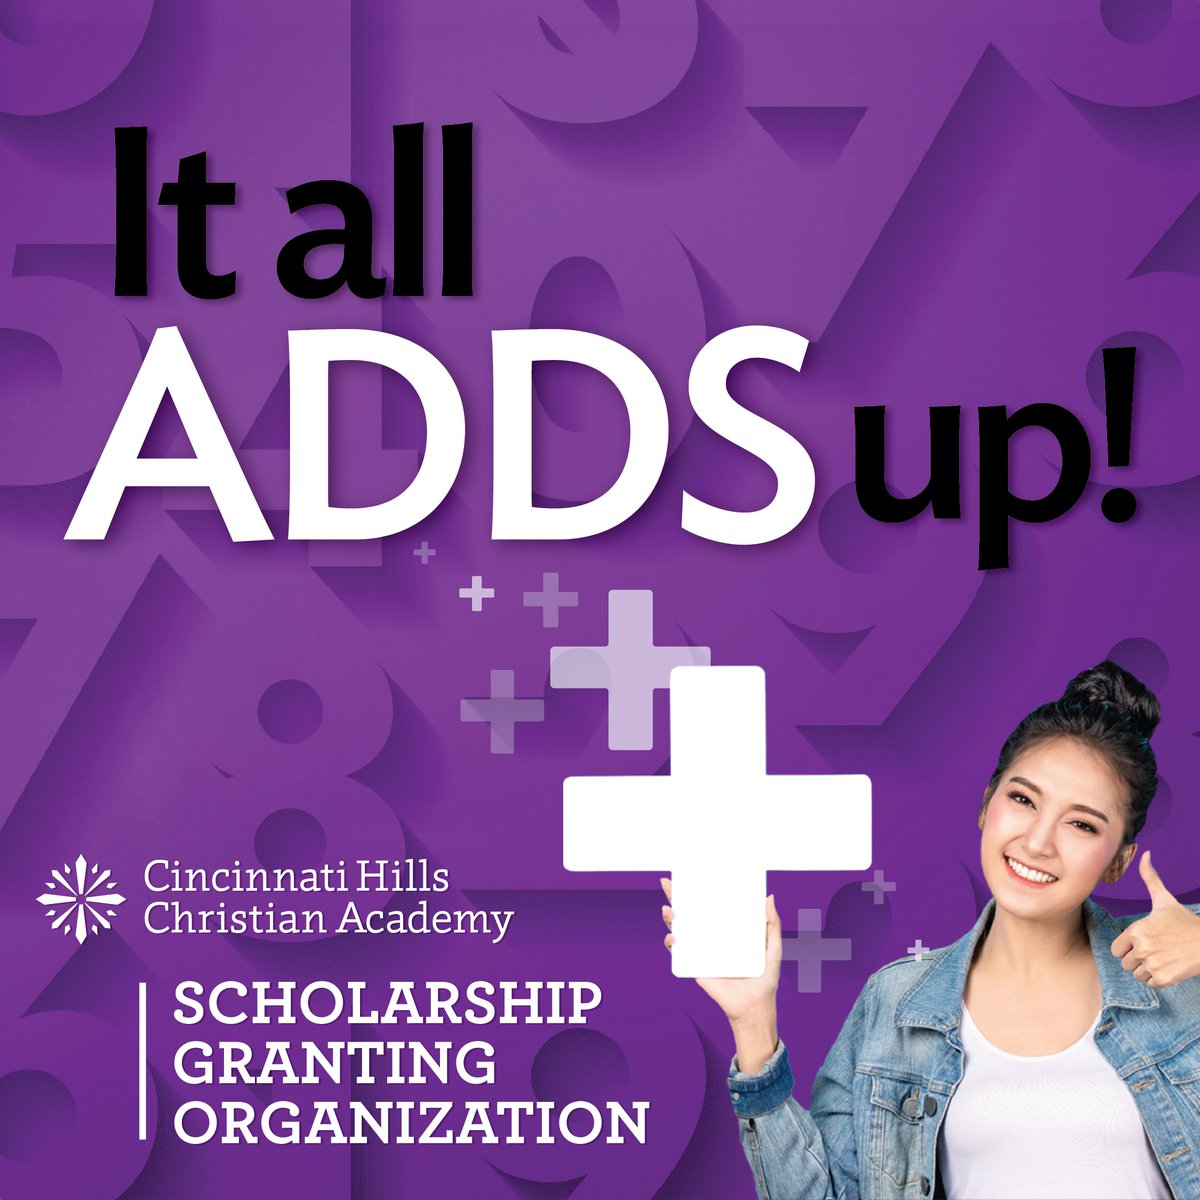 Today is the last day for SGO! Fund academic scholarships by giving to SGO, earn 2023 state tax credit, and help students become all God has called them to be. Participate today! chca-oh.org/support/taxcre… #GoCHCA #ItAllAddsUpAtCHCA